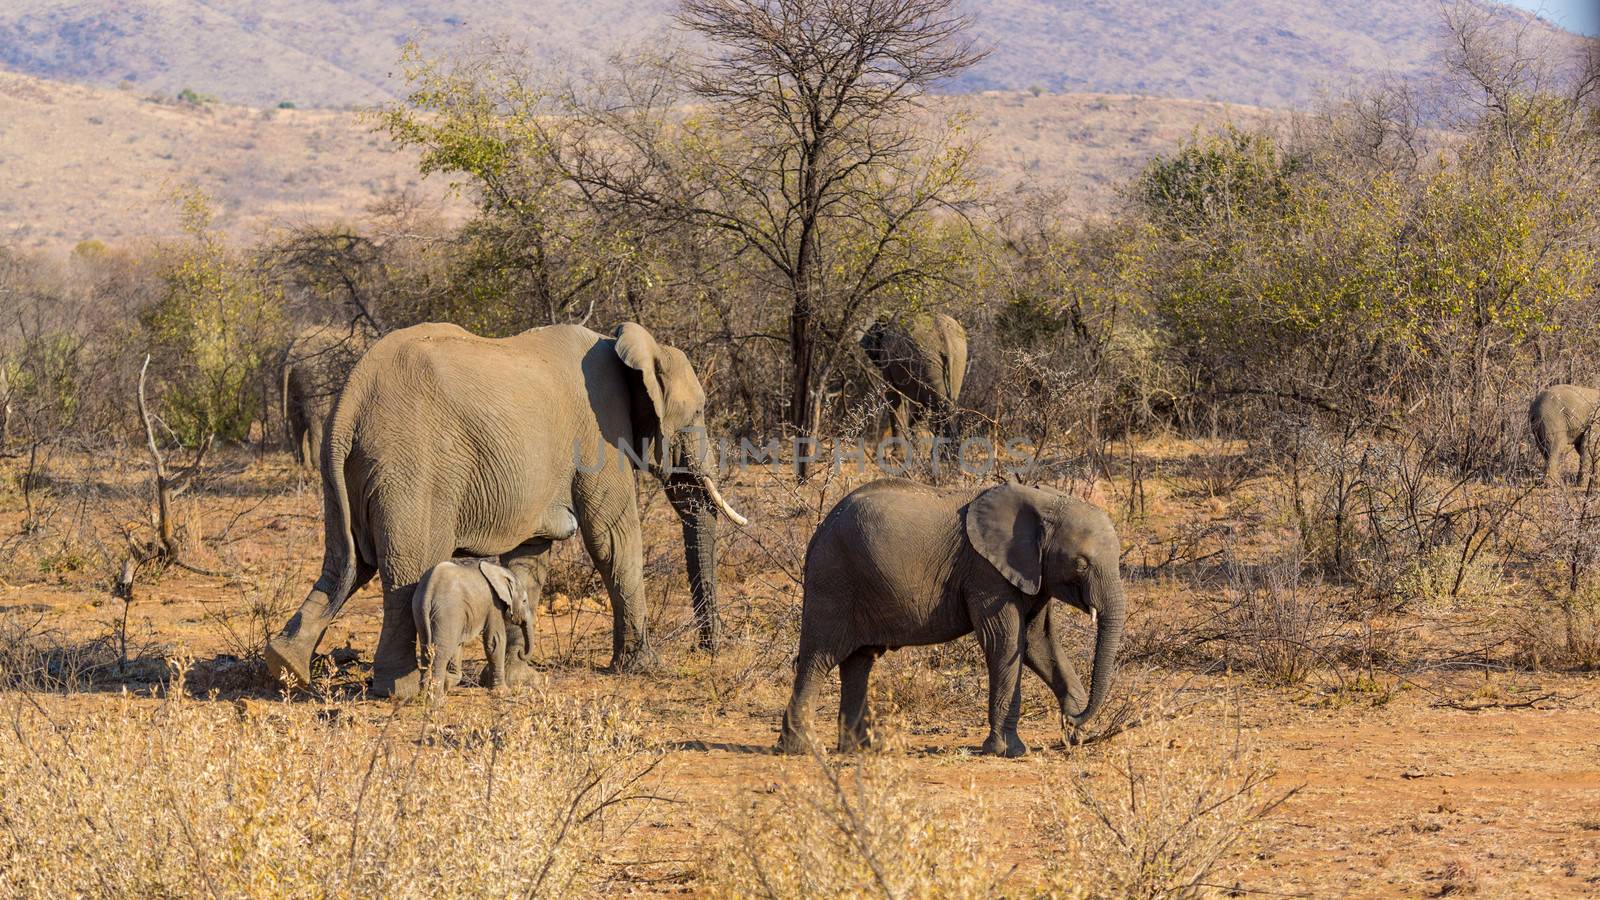 Elephants in the wild by derejeb